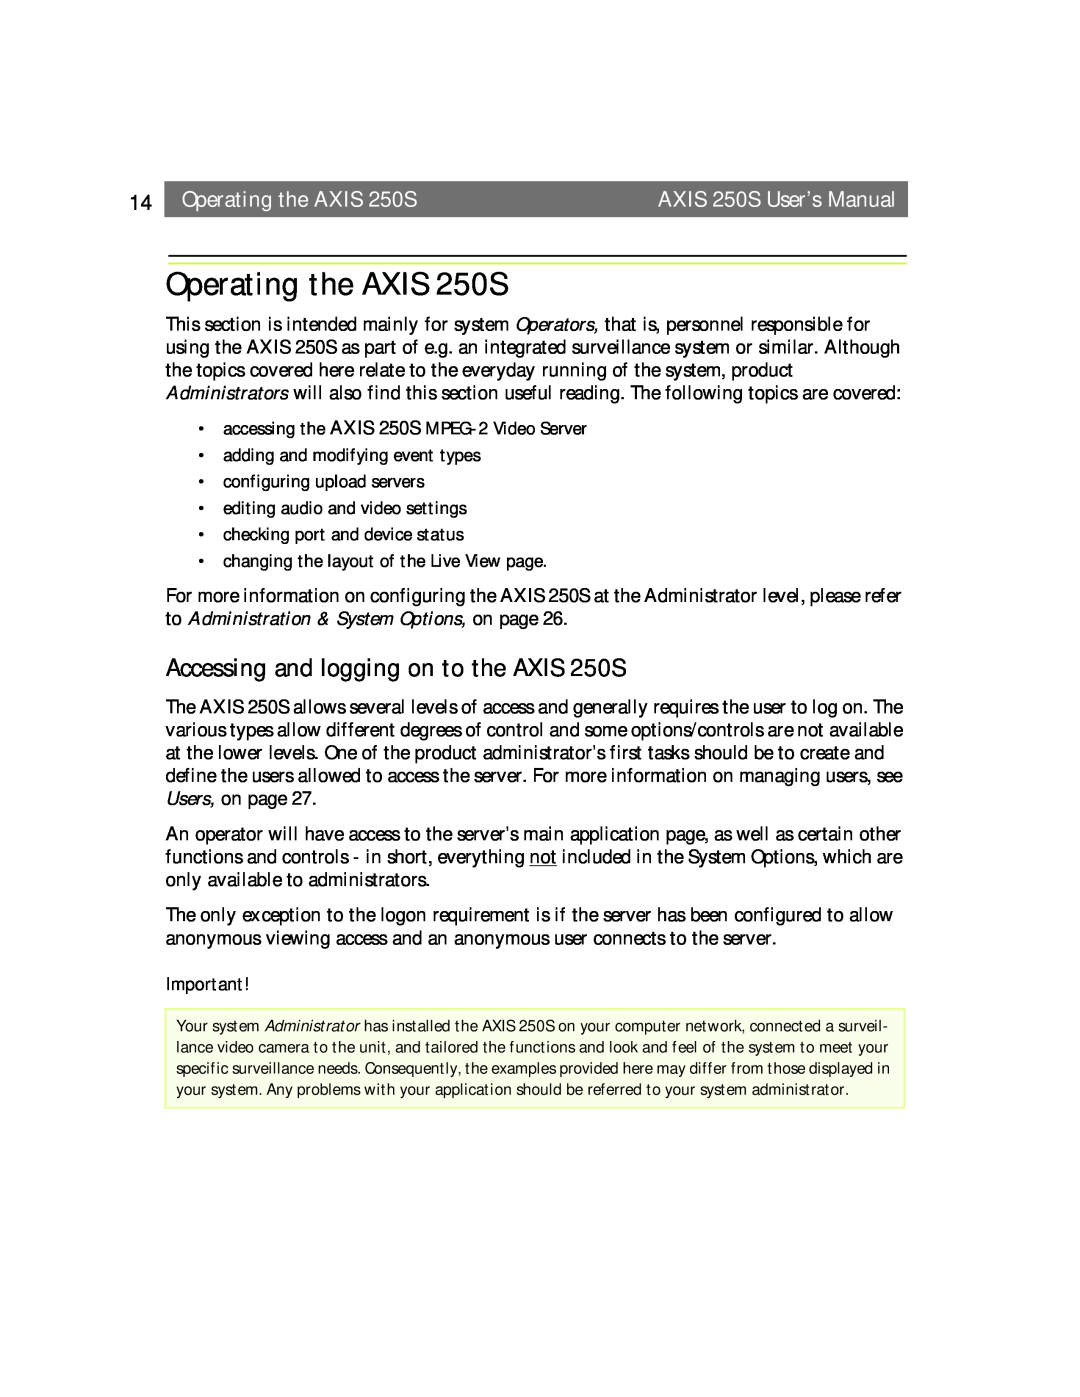 Axis Communications Operating the AXIS 250S, Accessing and logging on to the AXIS 250S, AXIS 250S User’s Manual 